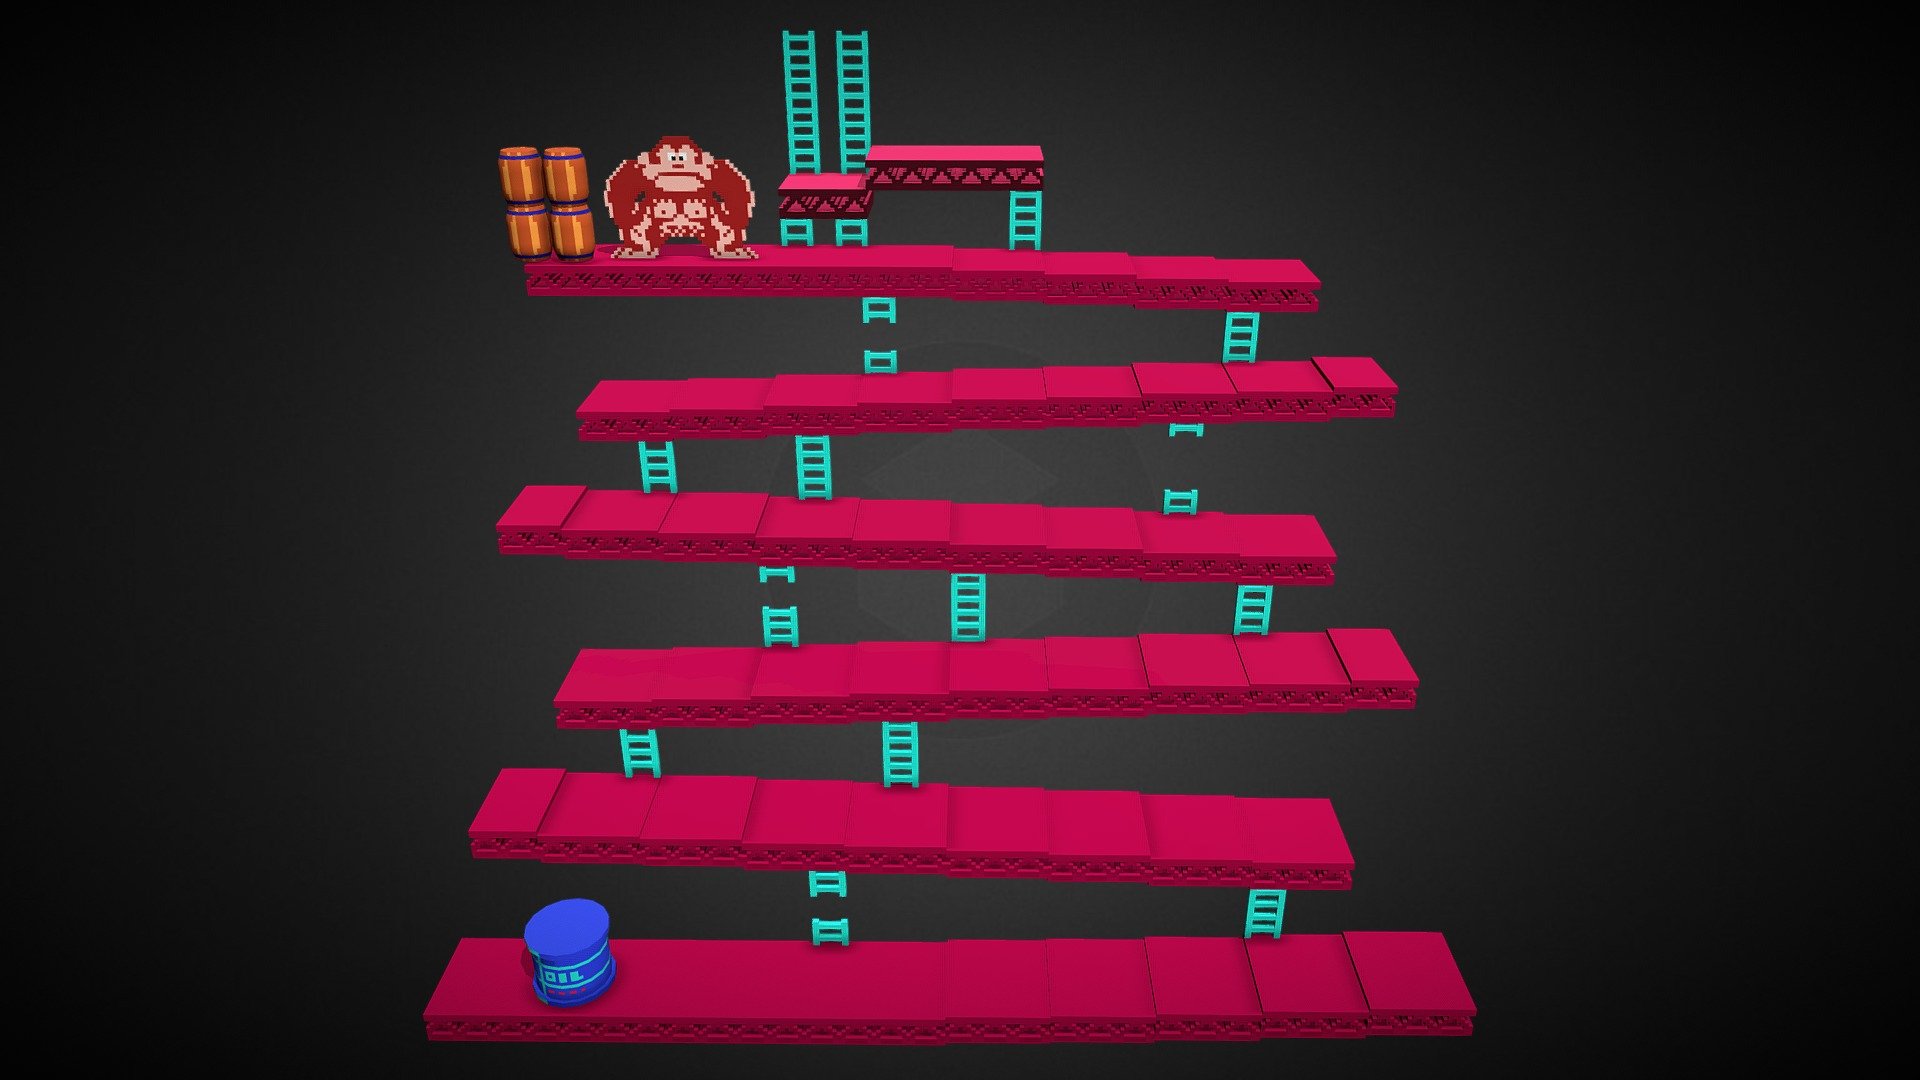 classic-donkey-kong-level-nes-download-free-3d-model-by-alfking49-83a8d8c-sketchfab